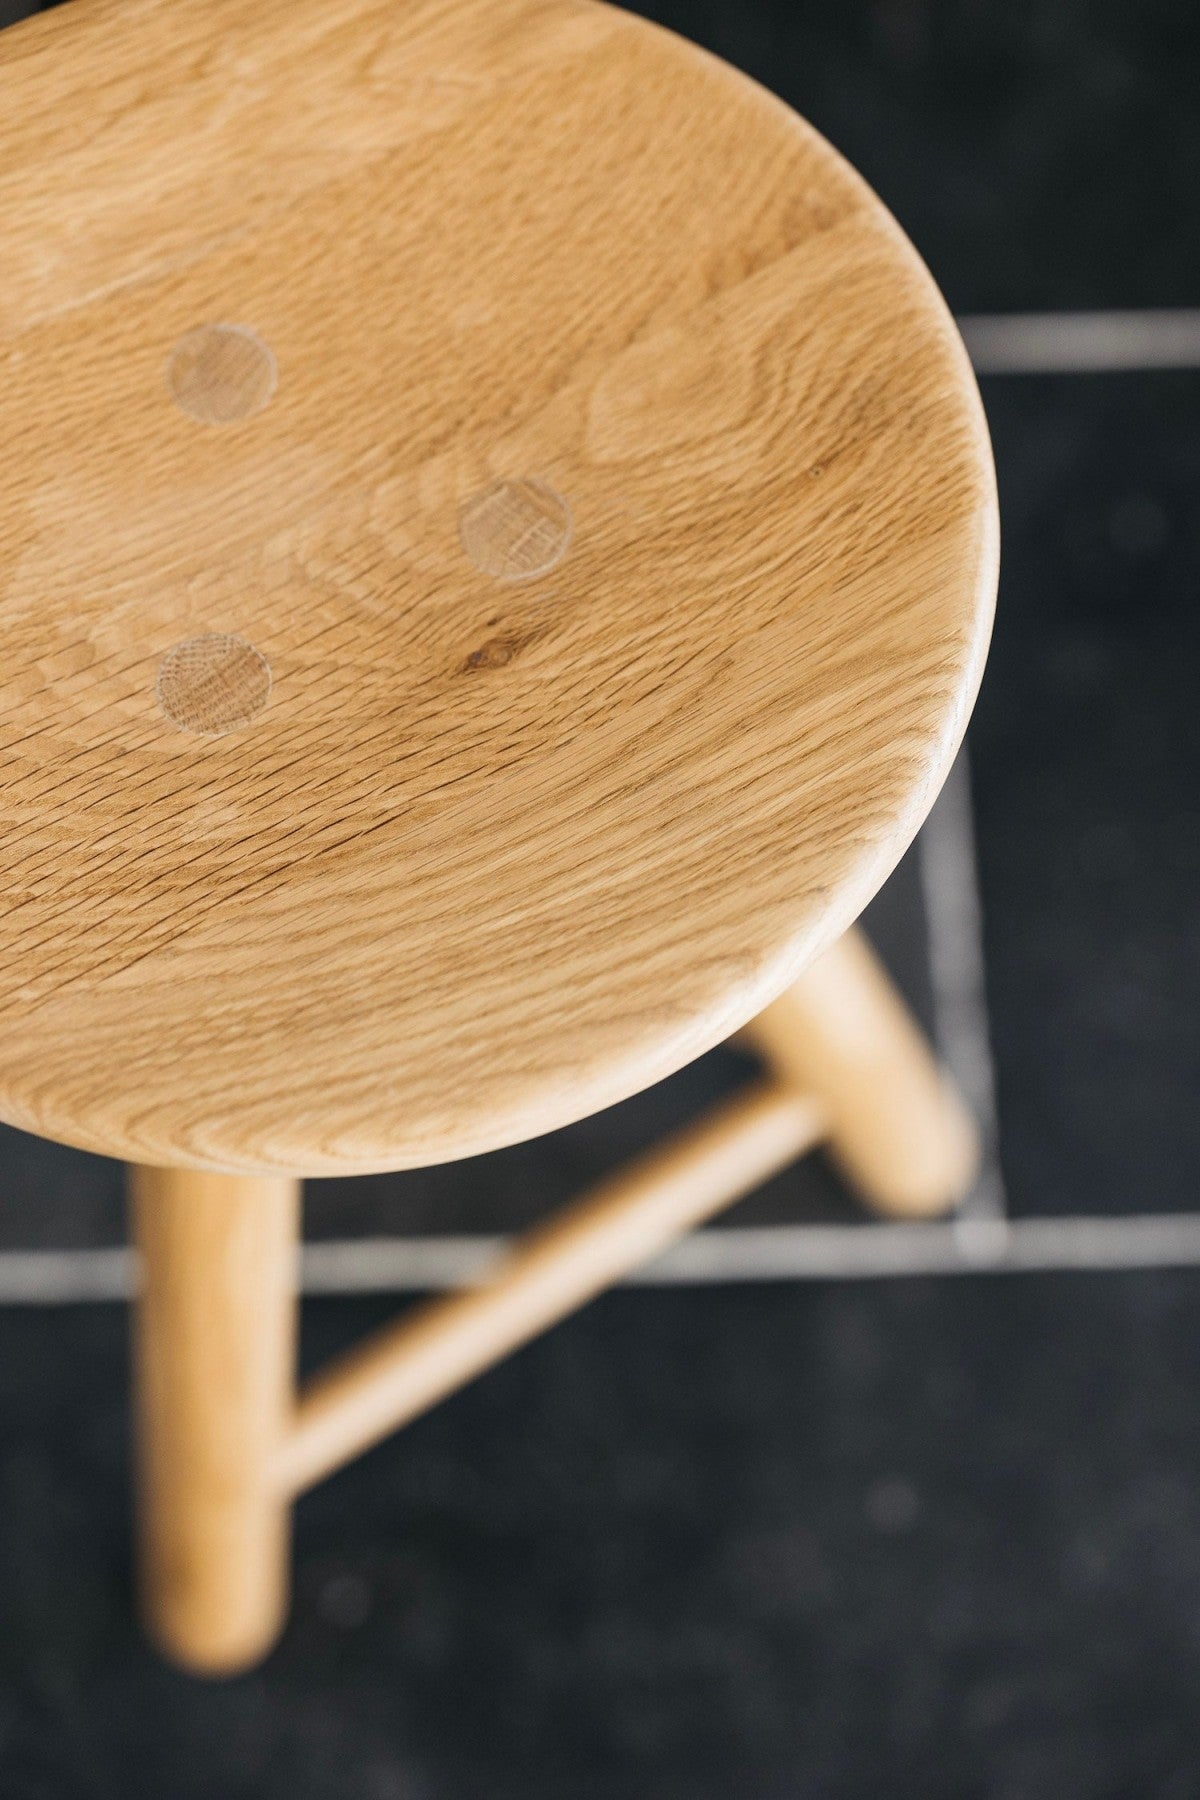 Dole Counter Stool - Natural